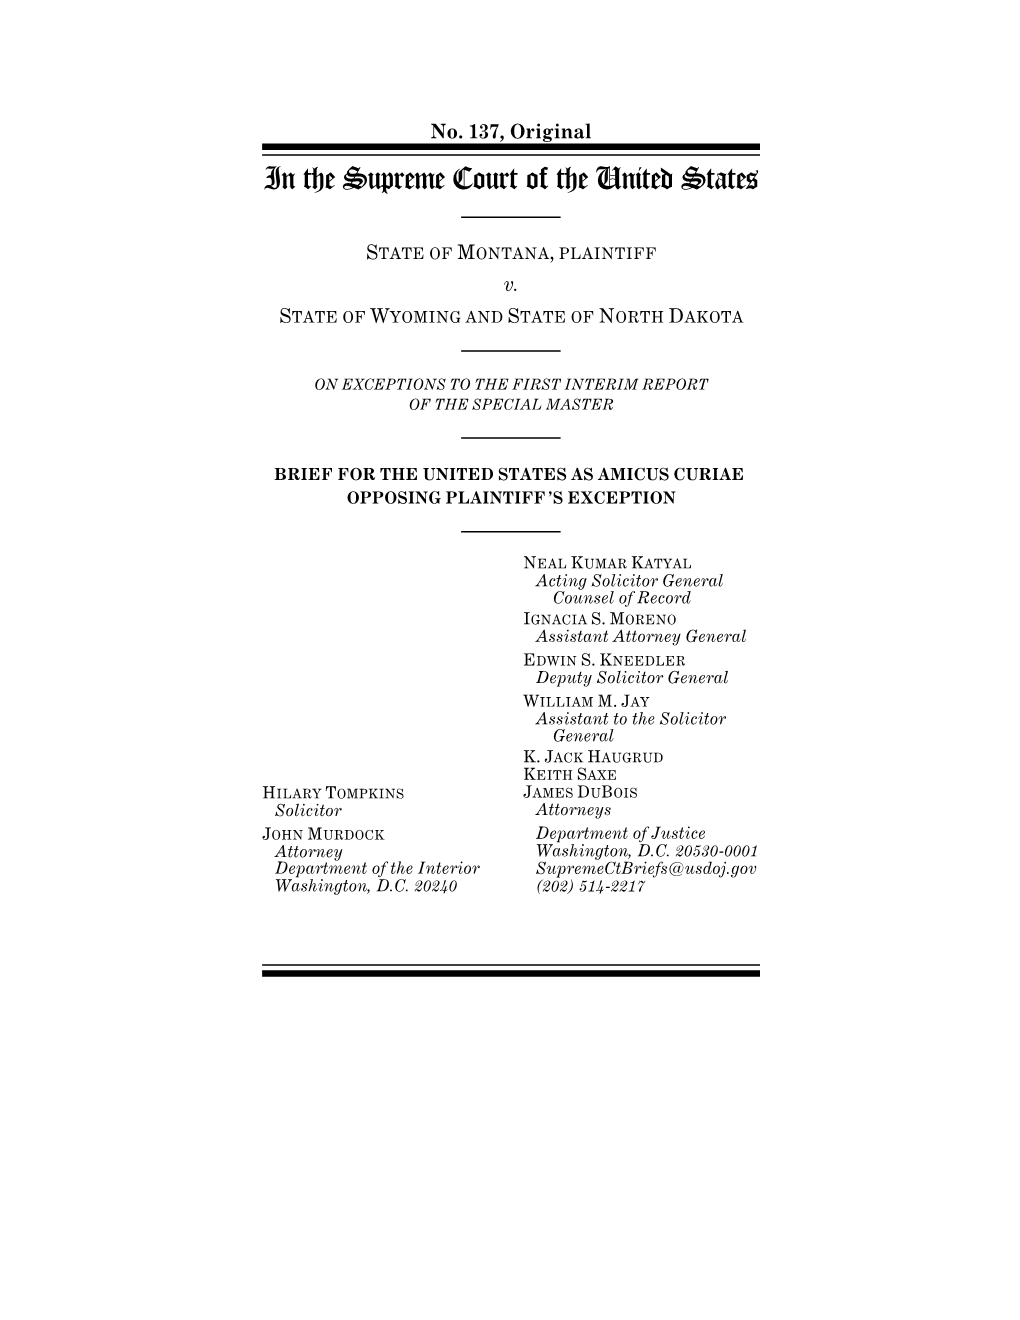 United States Amicus Brief Opposing Montana's Exception